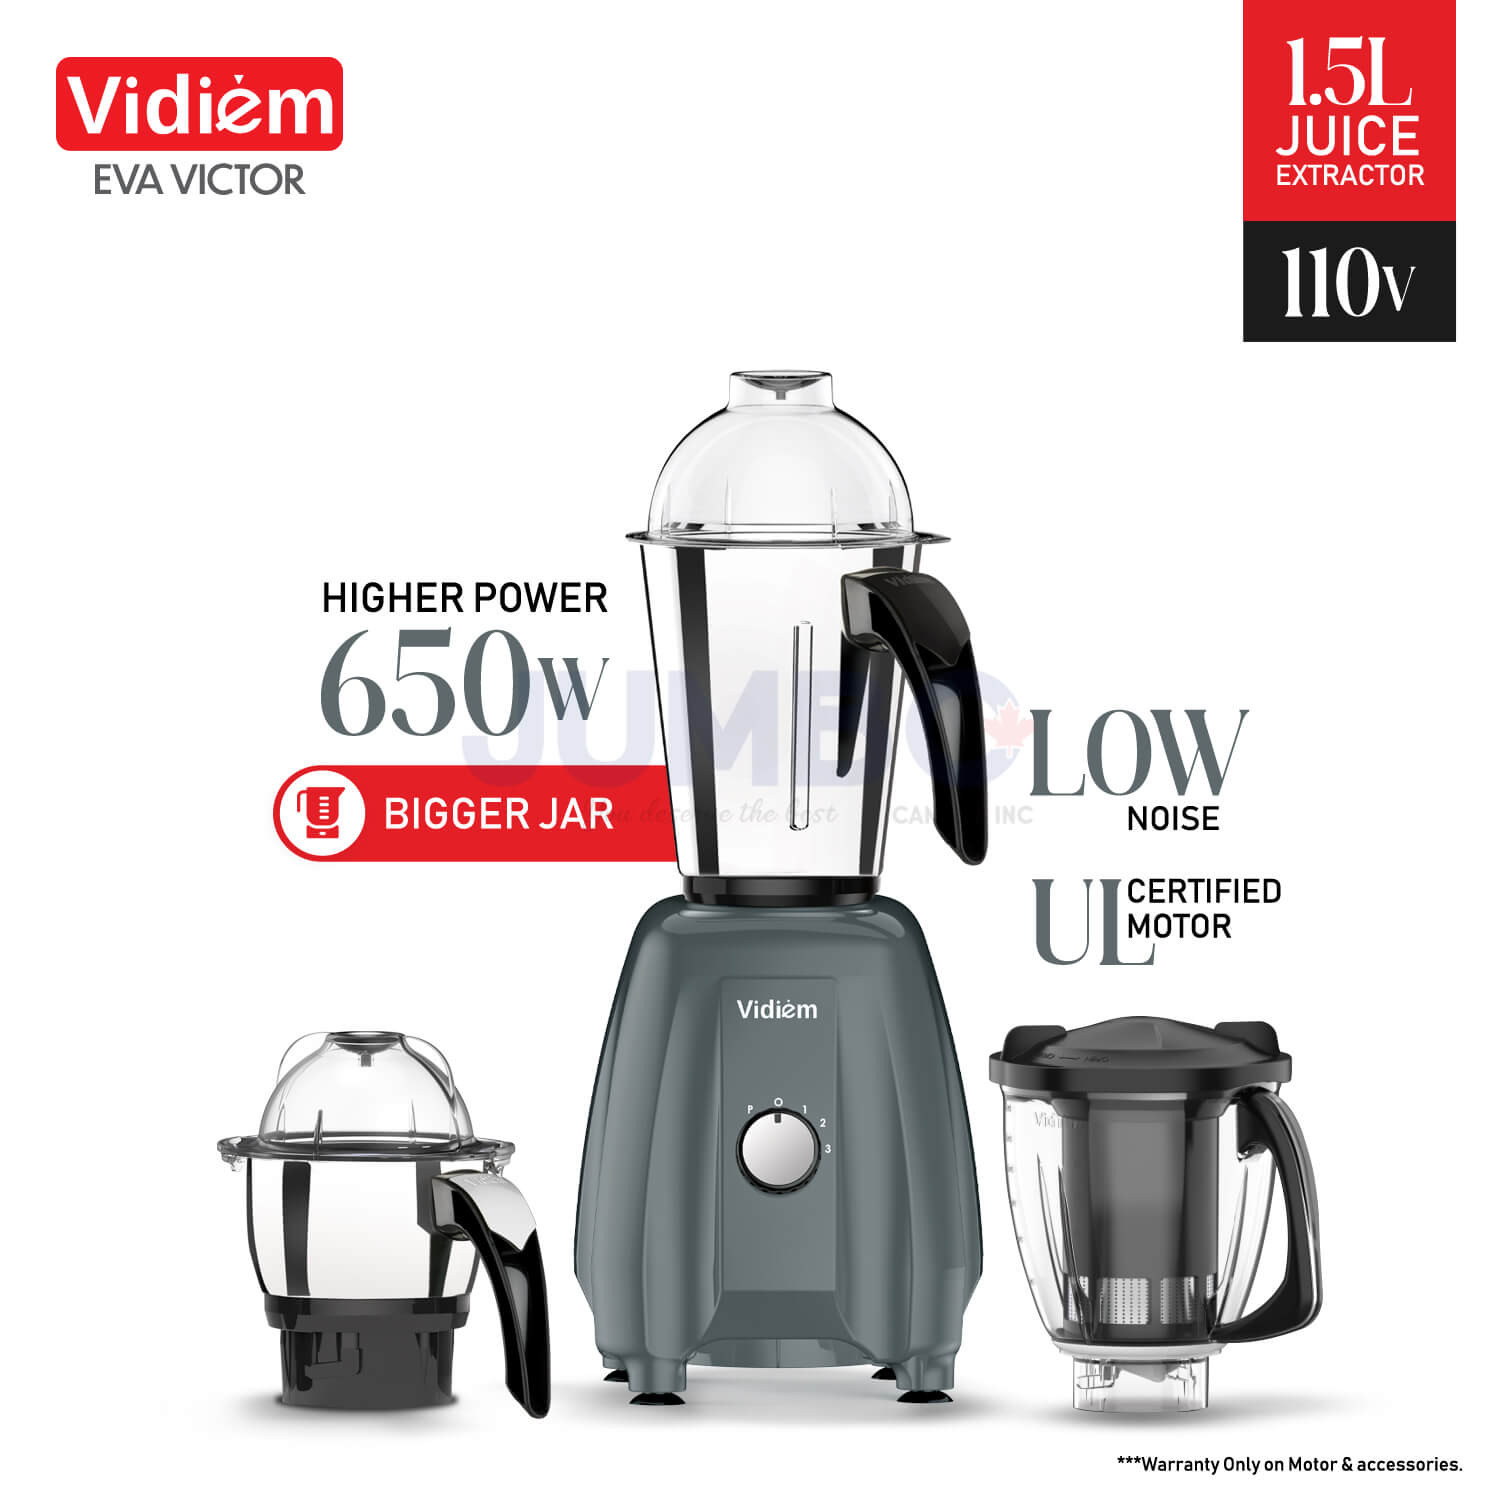 vidiem-eva-victor-650w-110v-stainless-steel-jars-indian-mixer-grinder-spice-coffee-grinder-with-almond-nut-milk-juice-extractor-for-use-in-canada-usa2